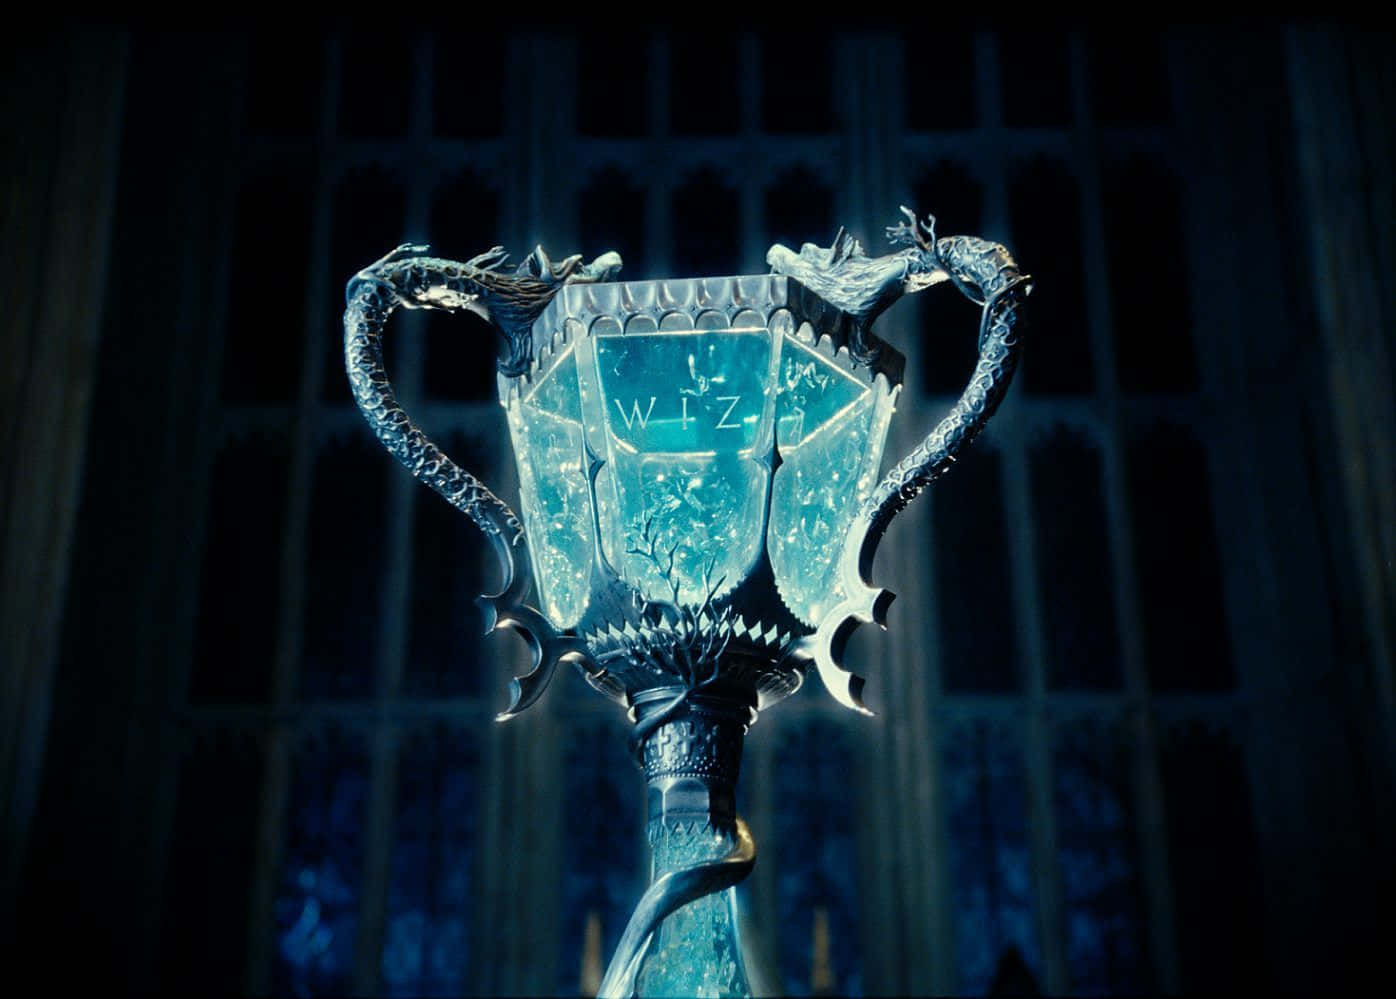 "The Triwizard Cup - the ultimate prize for the victor of the Triwizard Tournament". Wallpaper